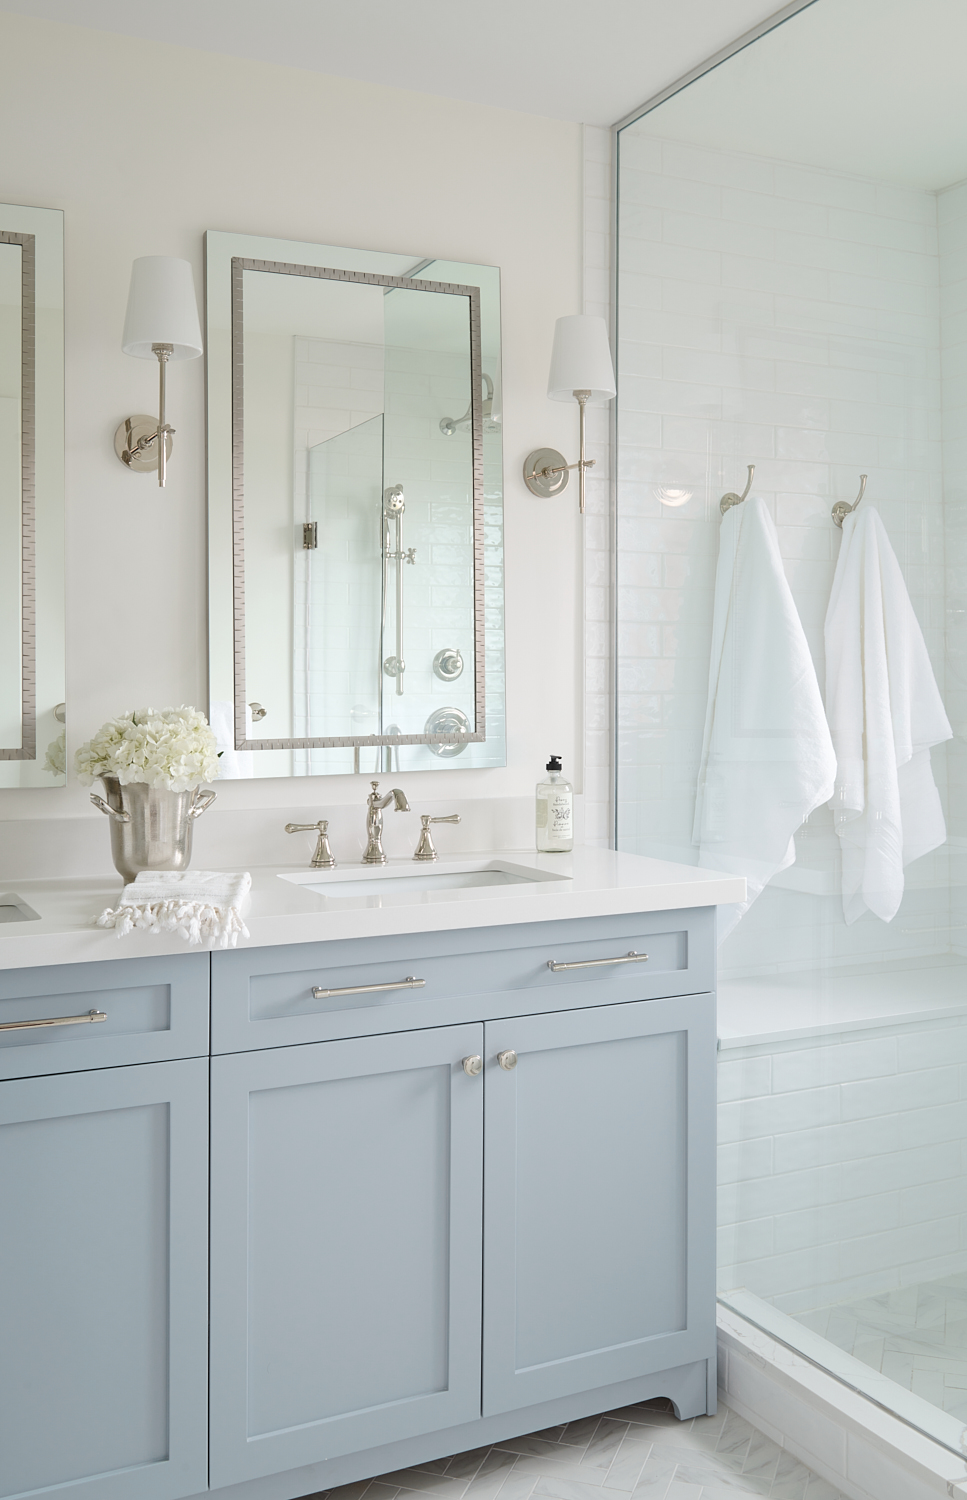 corner of bathroom showing light blue vanity with polished nickel faucets and hardware next to walk in shower with white fluffy towels hanging inside